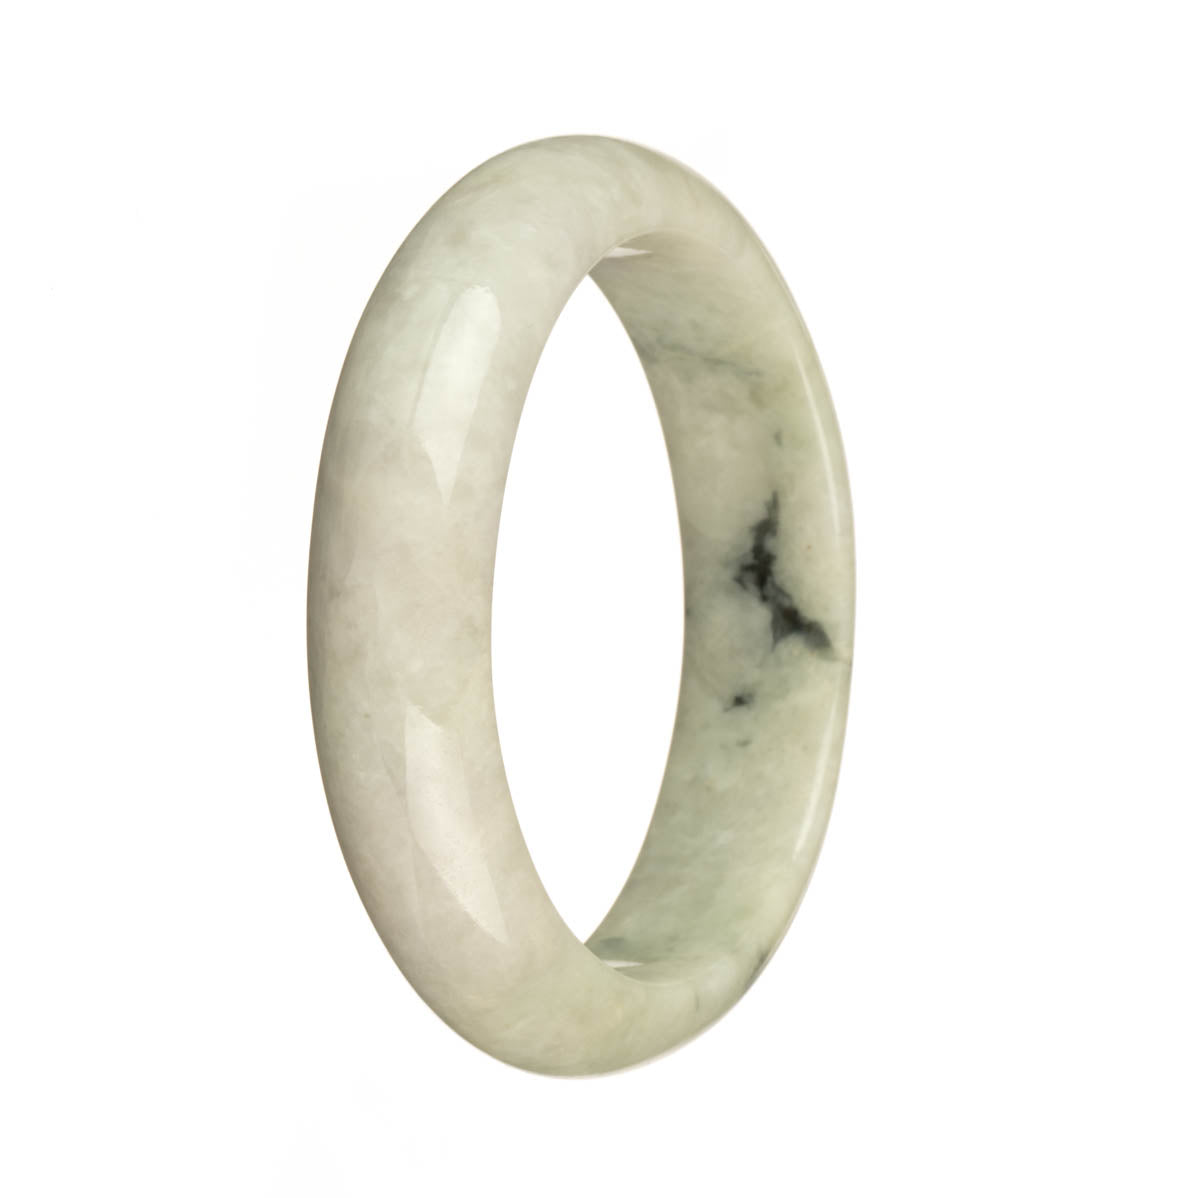 A stunning Burmese Jade bangle bracelet with a real grade A white and pale green base color, featuring a beautiful dark green pattern. The bracelet is in the shape of a 58mm half moon. Designed by MAYS™.